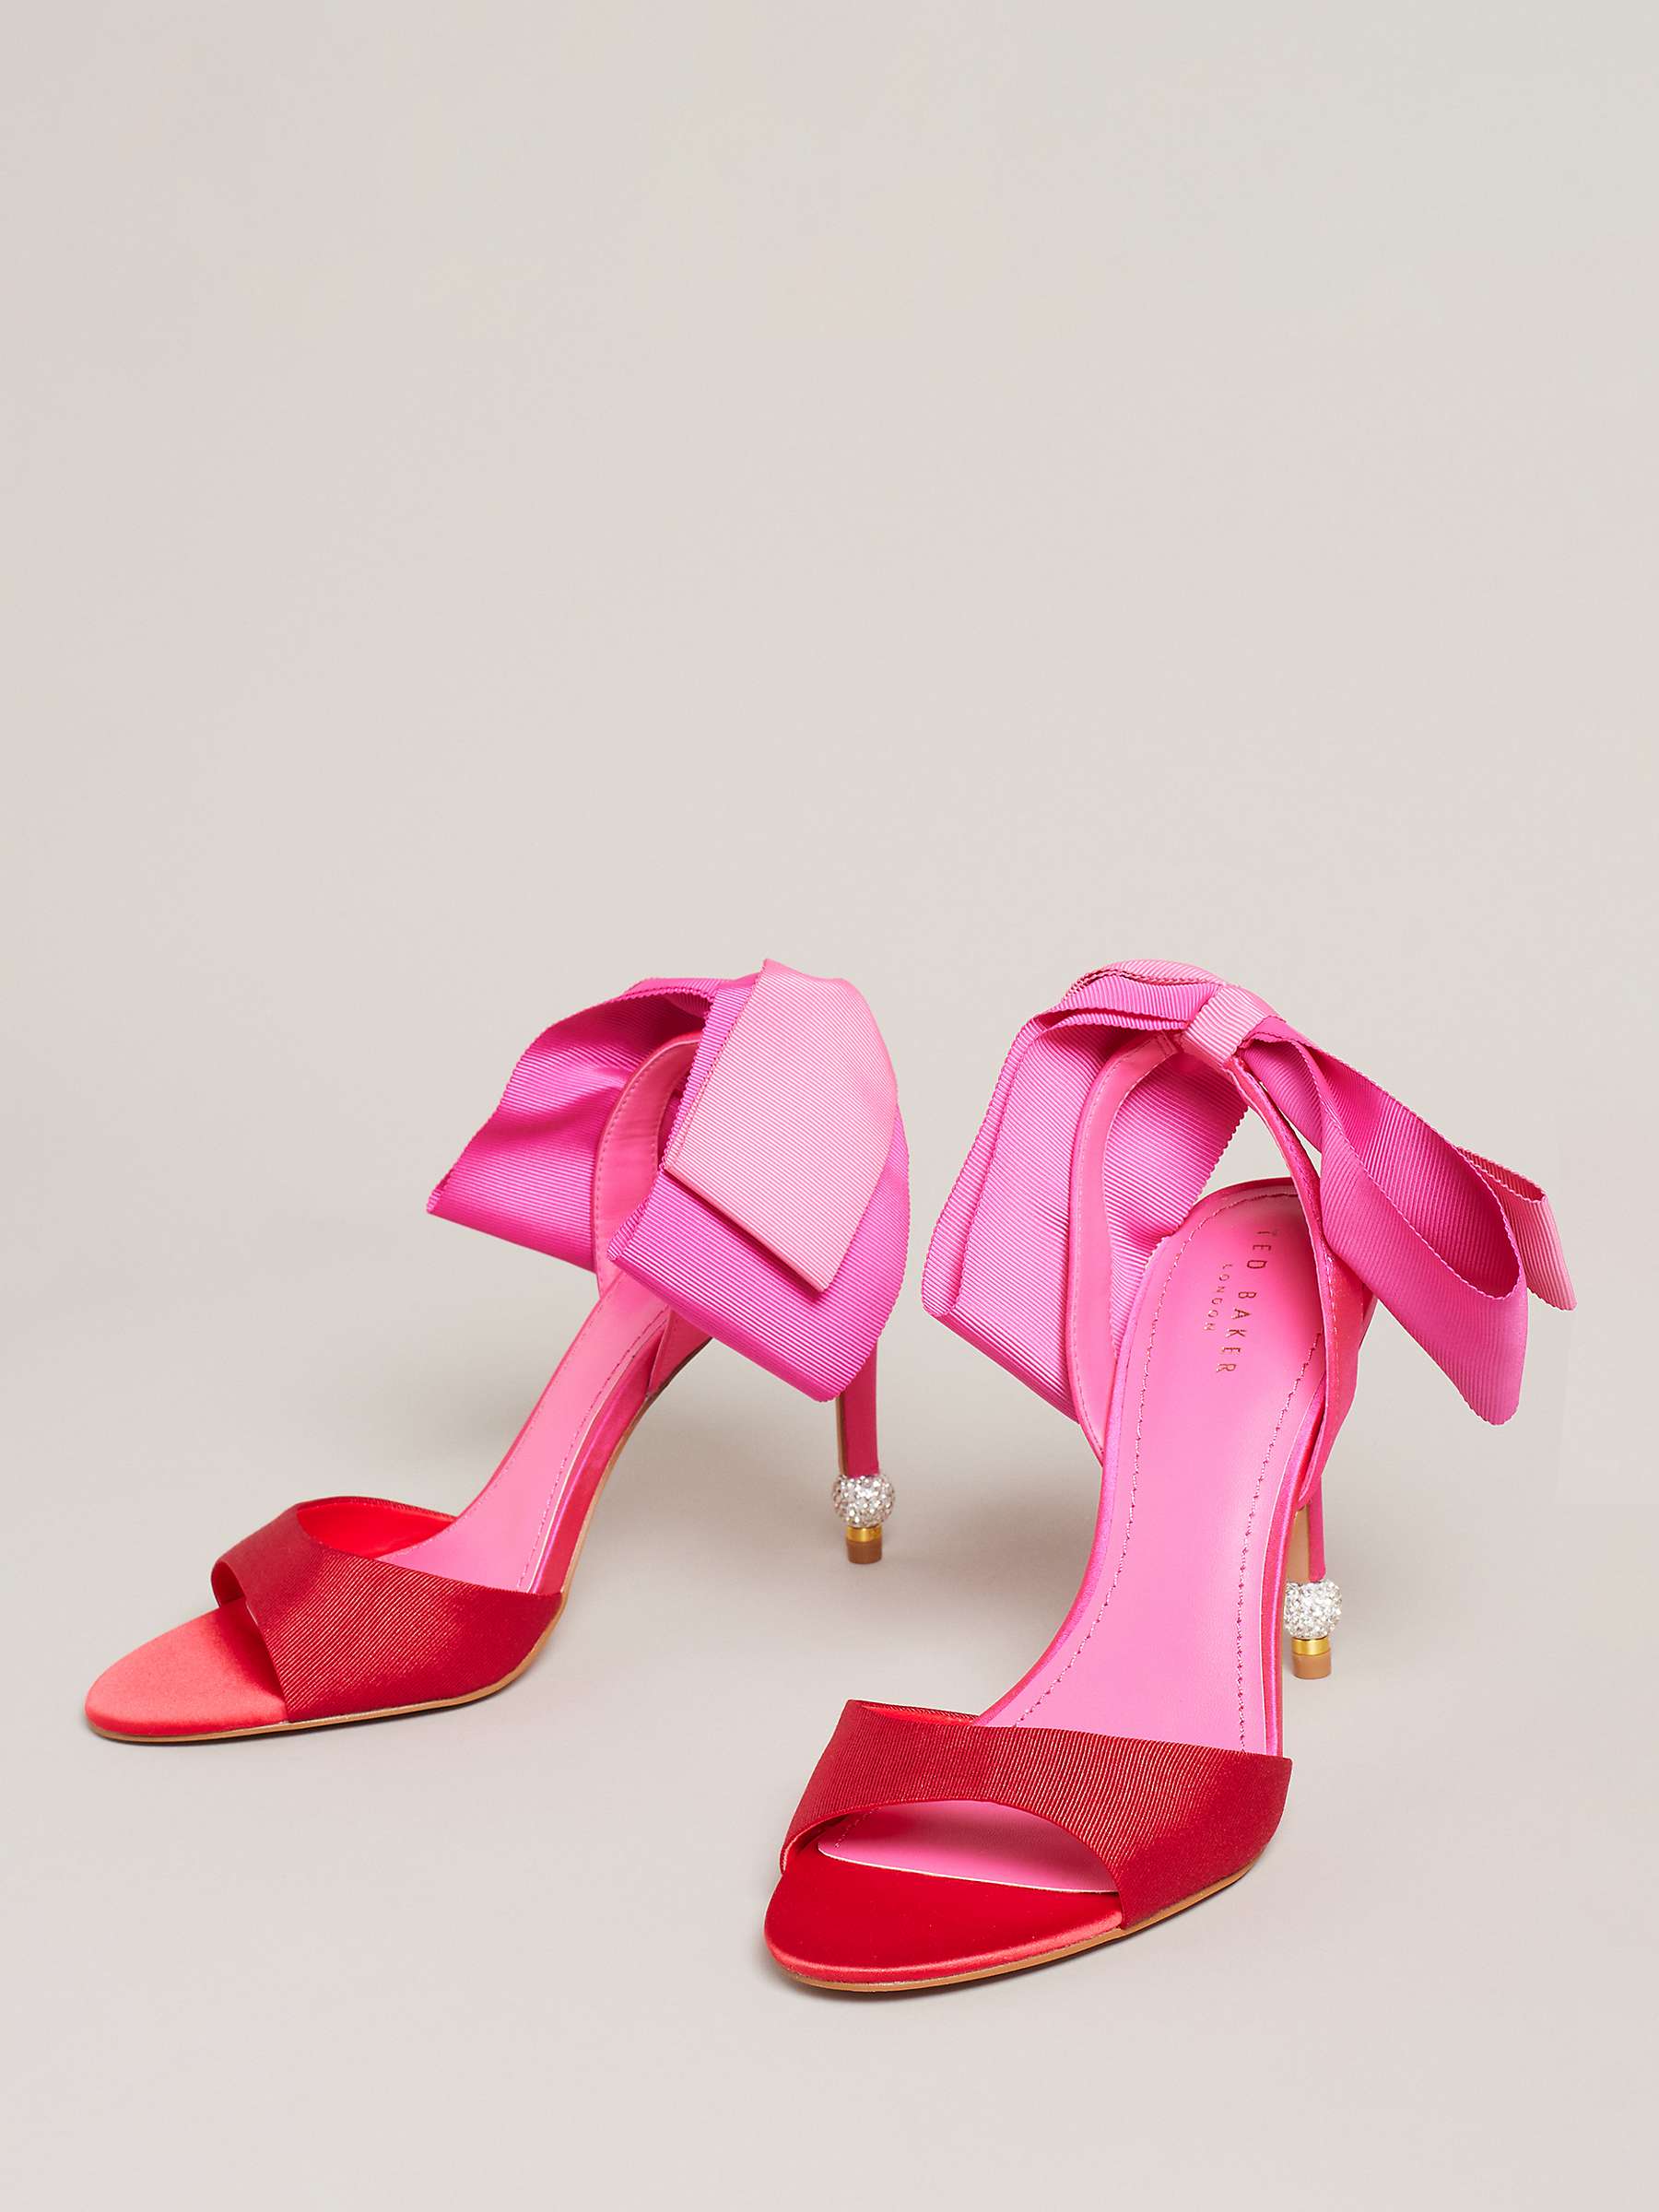 Buy Ted Baker Harinas Oversized Bow Back Sandals, Bright Pink Online at johnlewis.com